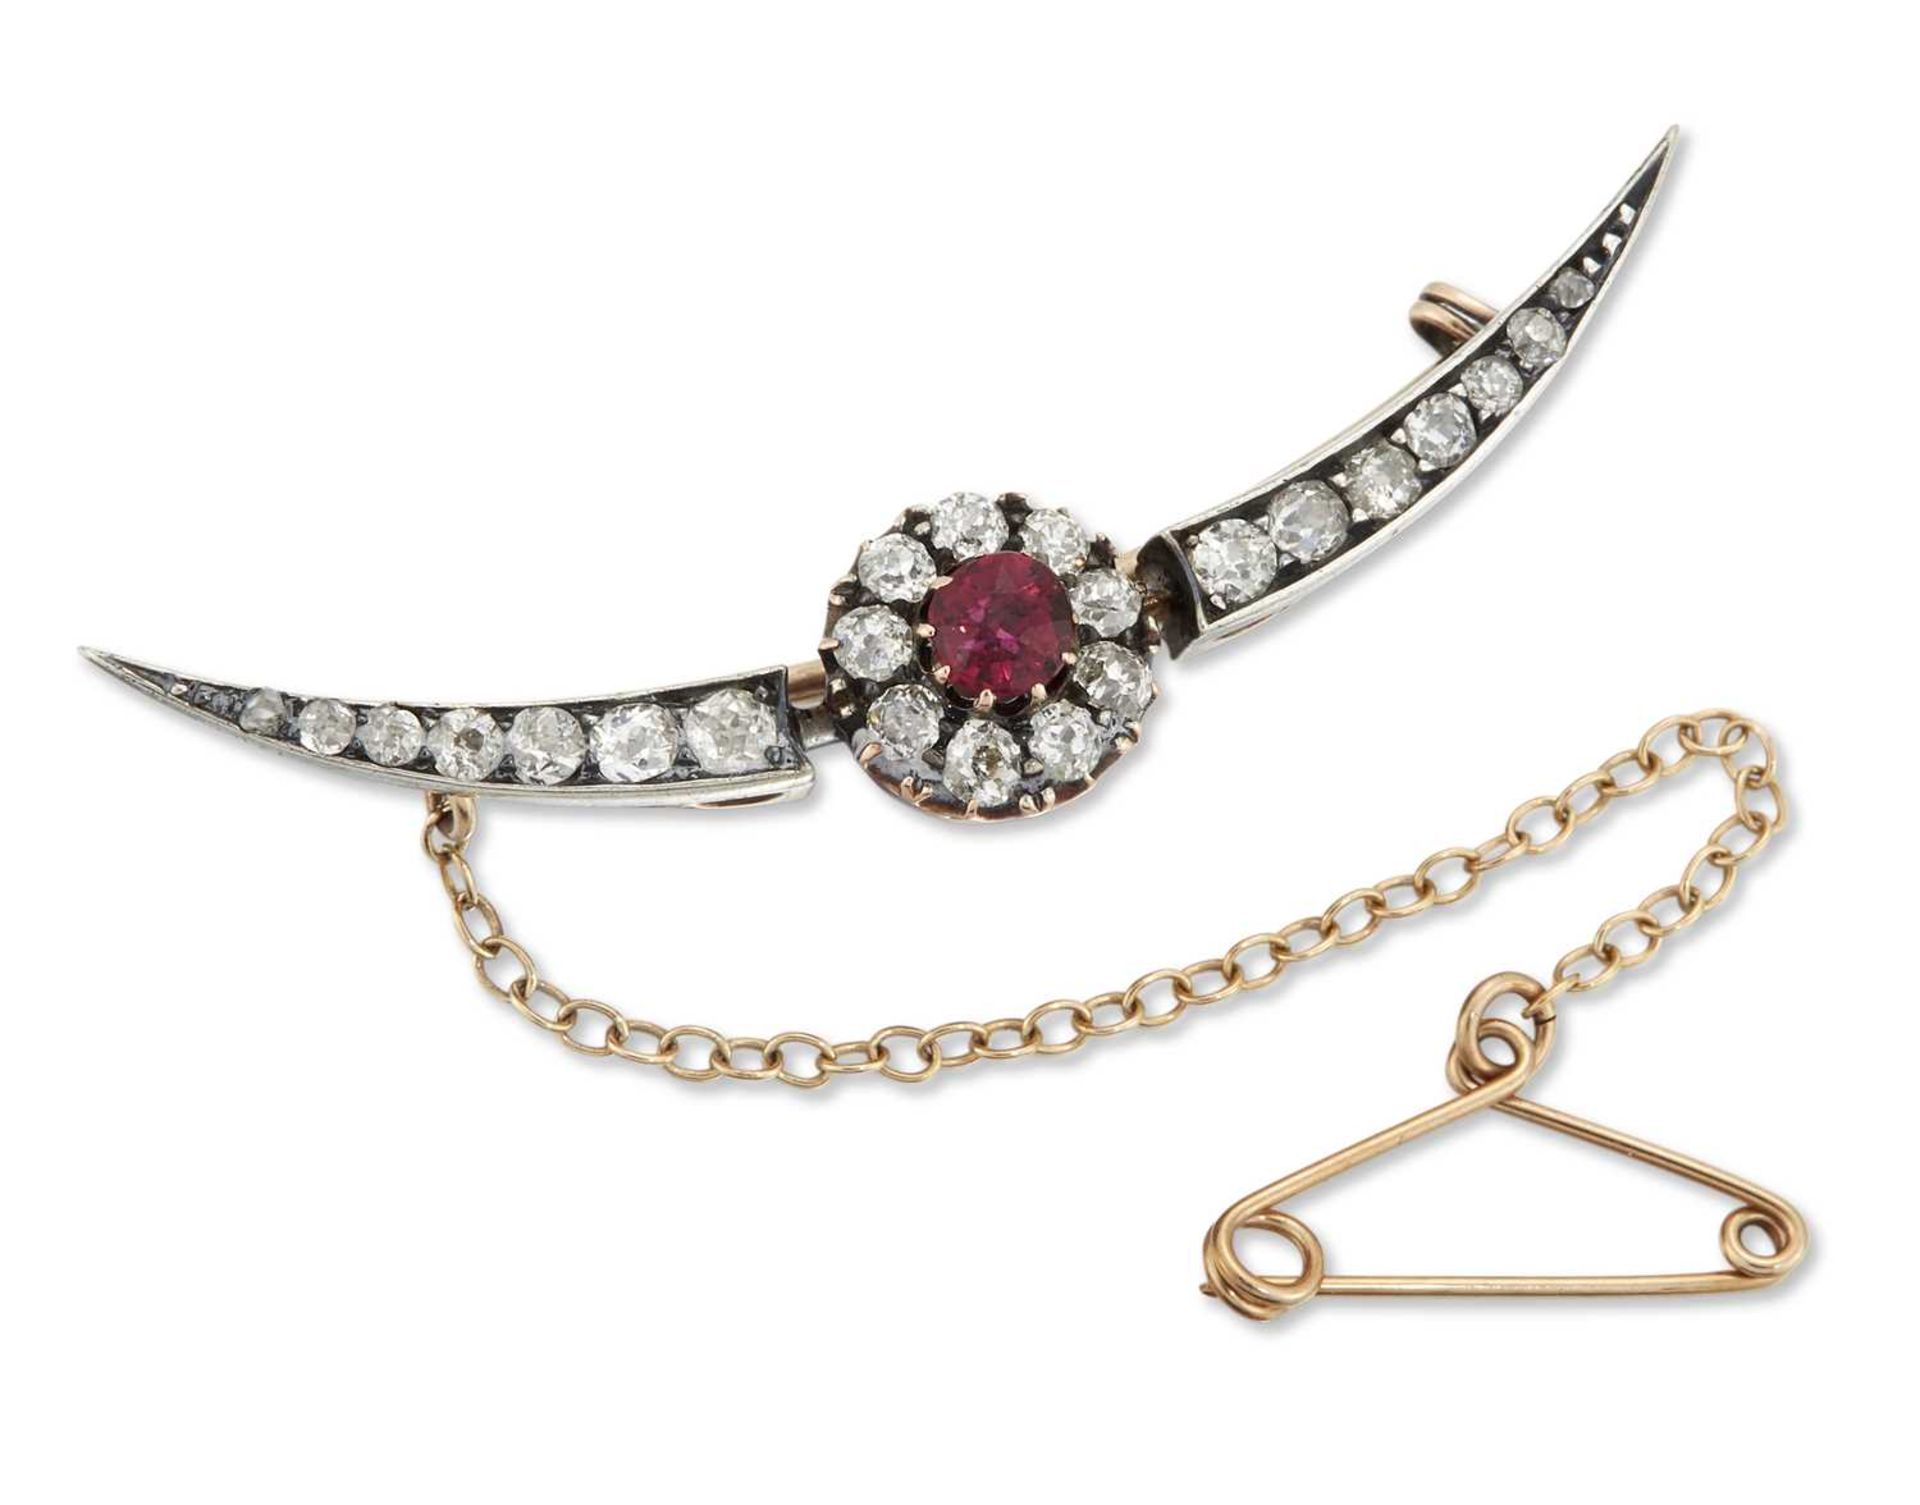 A LATE 19TH / EARLY 20TH CENTURY RUBY AND DIAMOND CRESCENT CLUSTER BROOCH